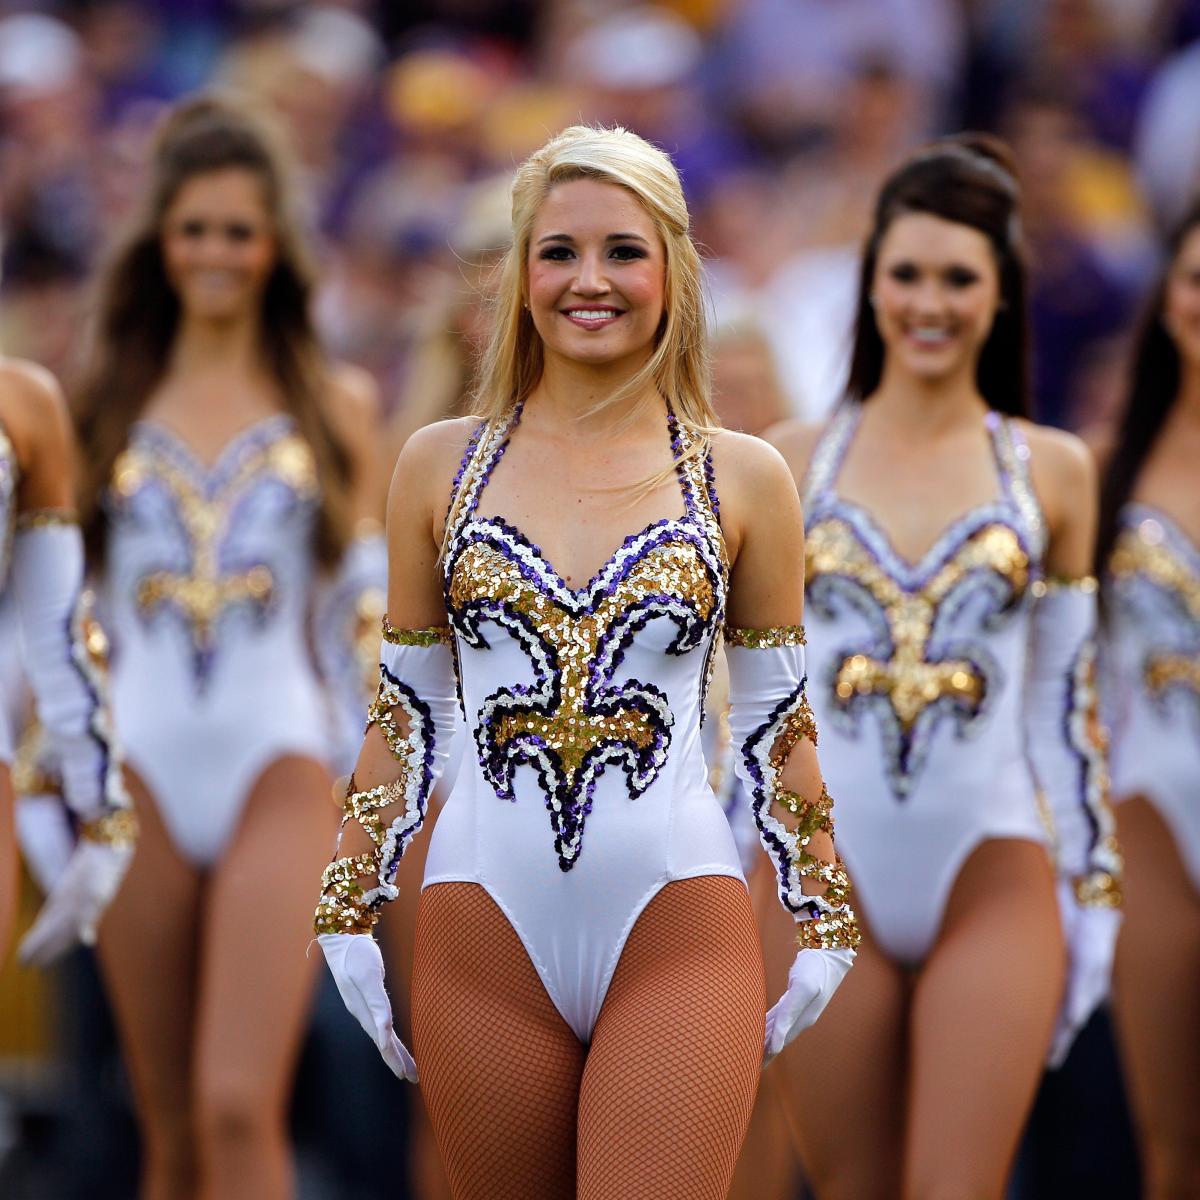 Hot Colleges: the 25 Hottest Universities in the US